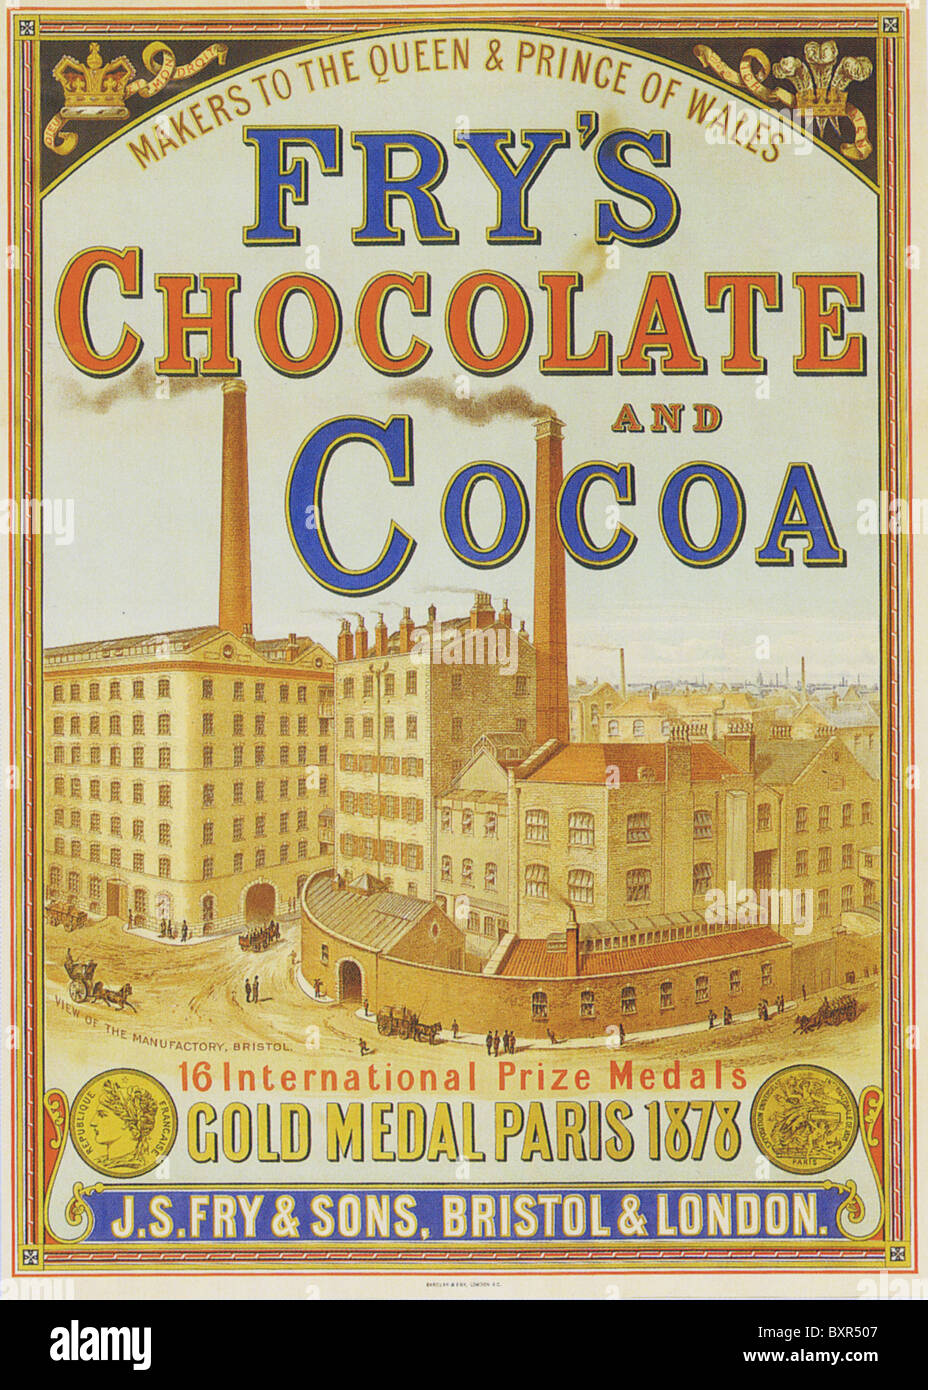 FRY'S CHOCOLATE AND COCOA advert 1880 Stock Photo